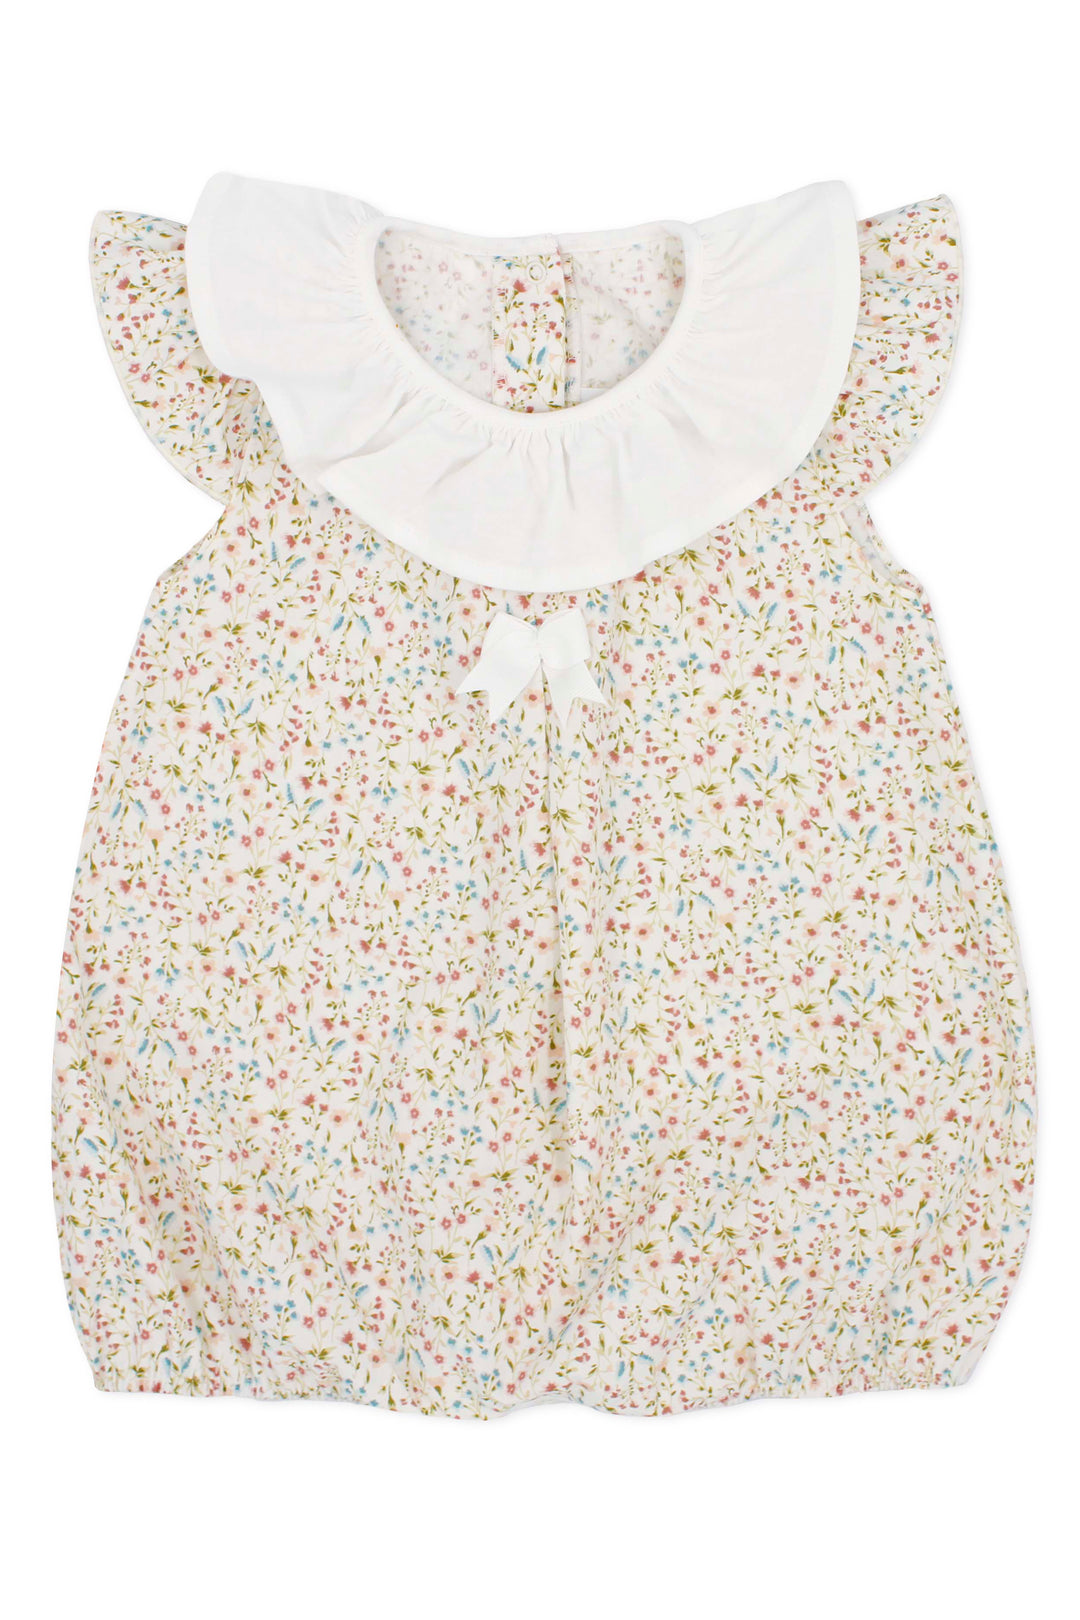 Rapife "Immy" Pastel Floral Romper | Millie and John